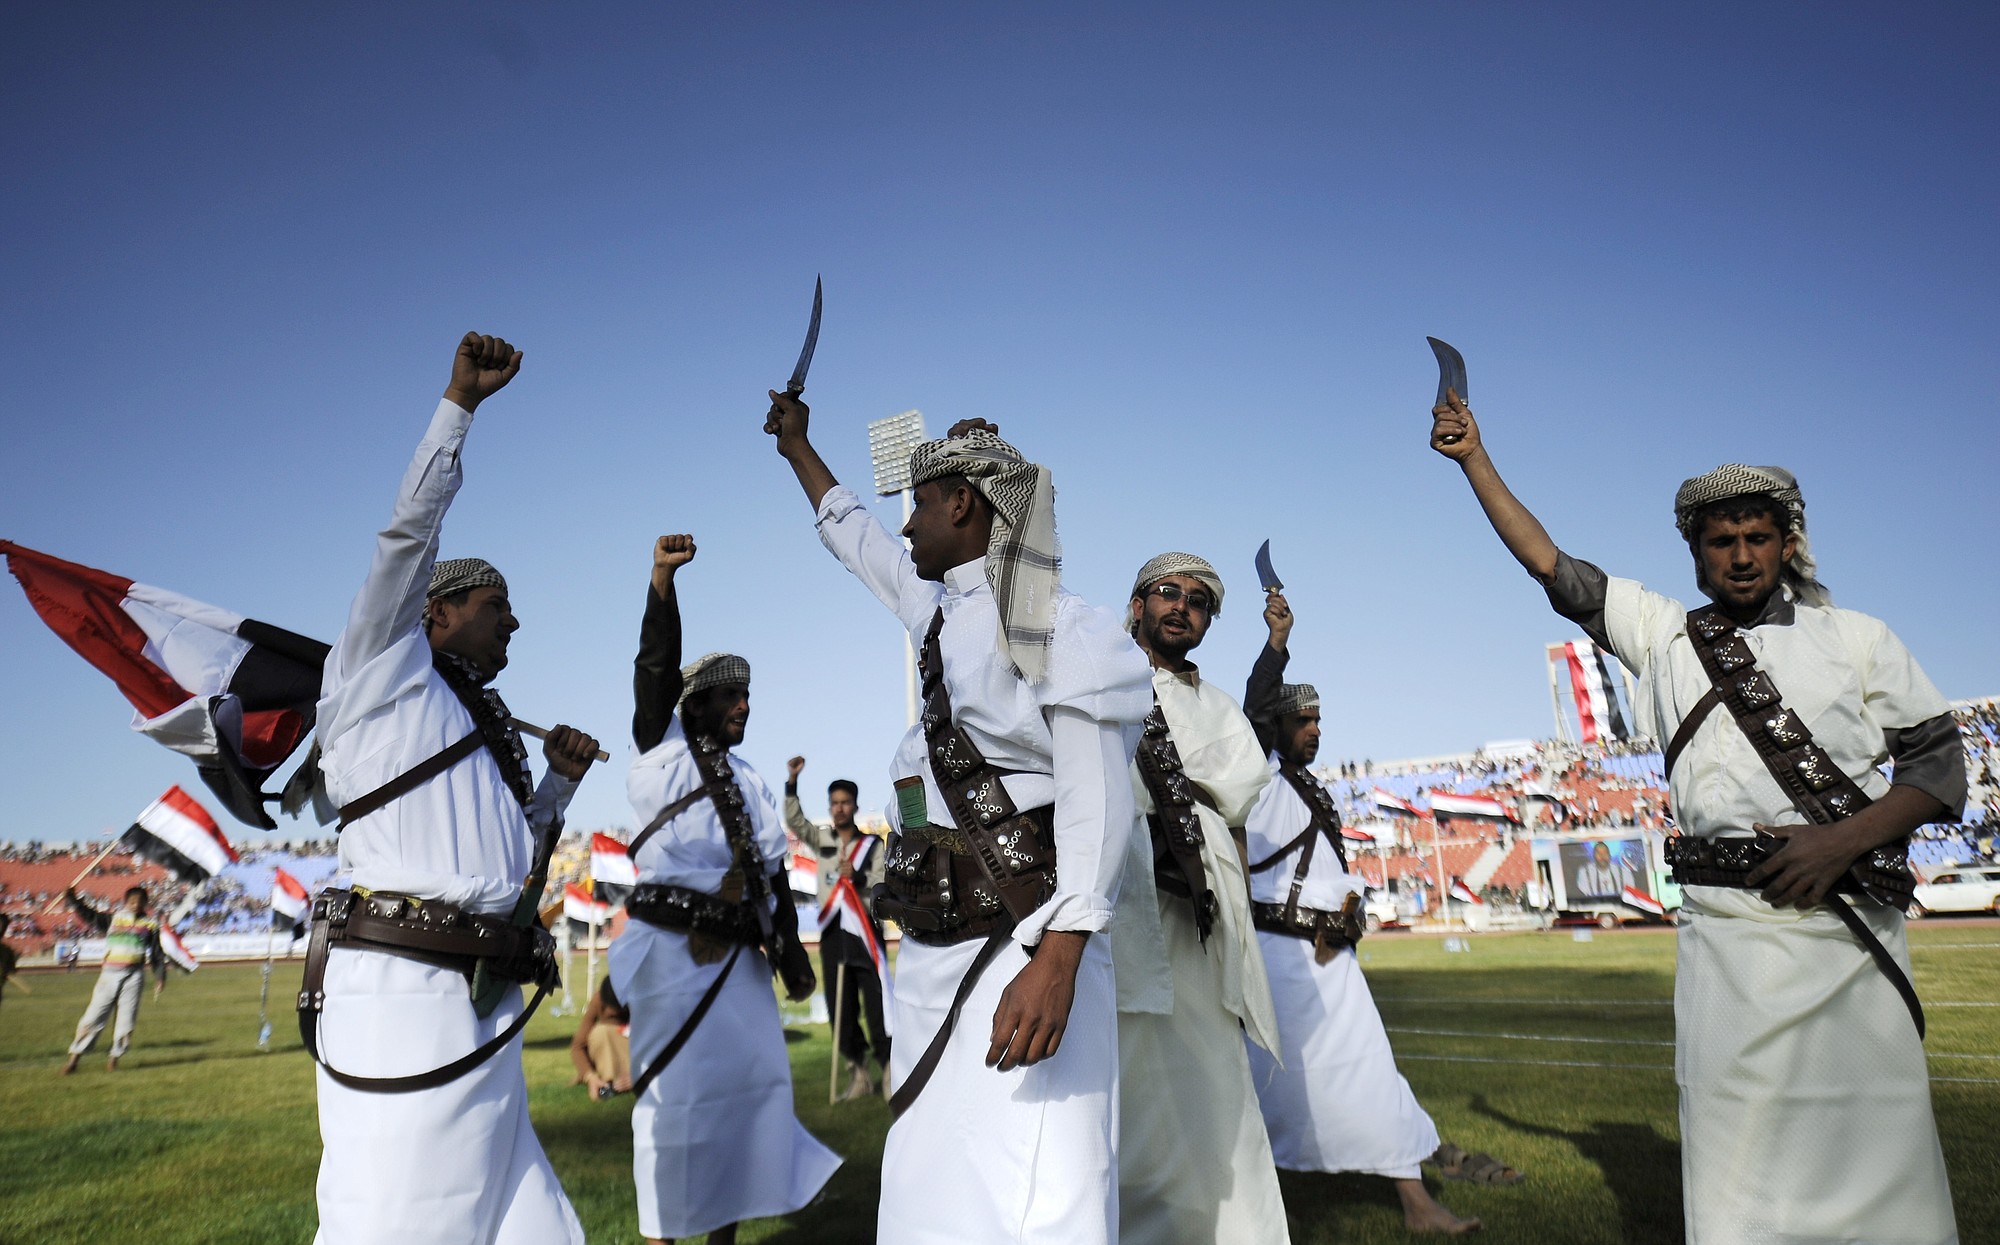 Supporters of Houthi Shiites, who took over the government of Yemen and installed a new committee to govern, wave traditional daggers and chant slogans at a rally at a sports stadium in Sanaa, Yemen, on Saturday,